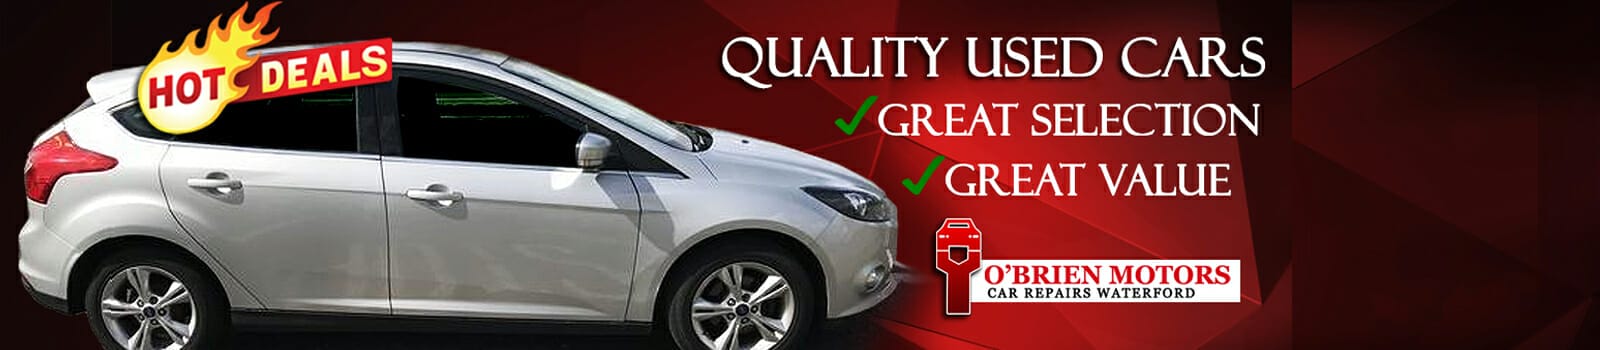 Best-Quality-Used-Cars-For-Sale-Waterford-City